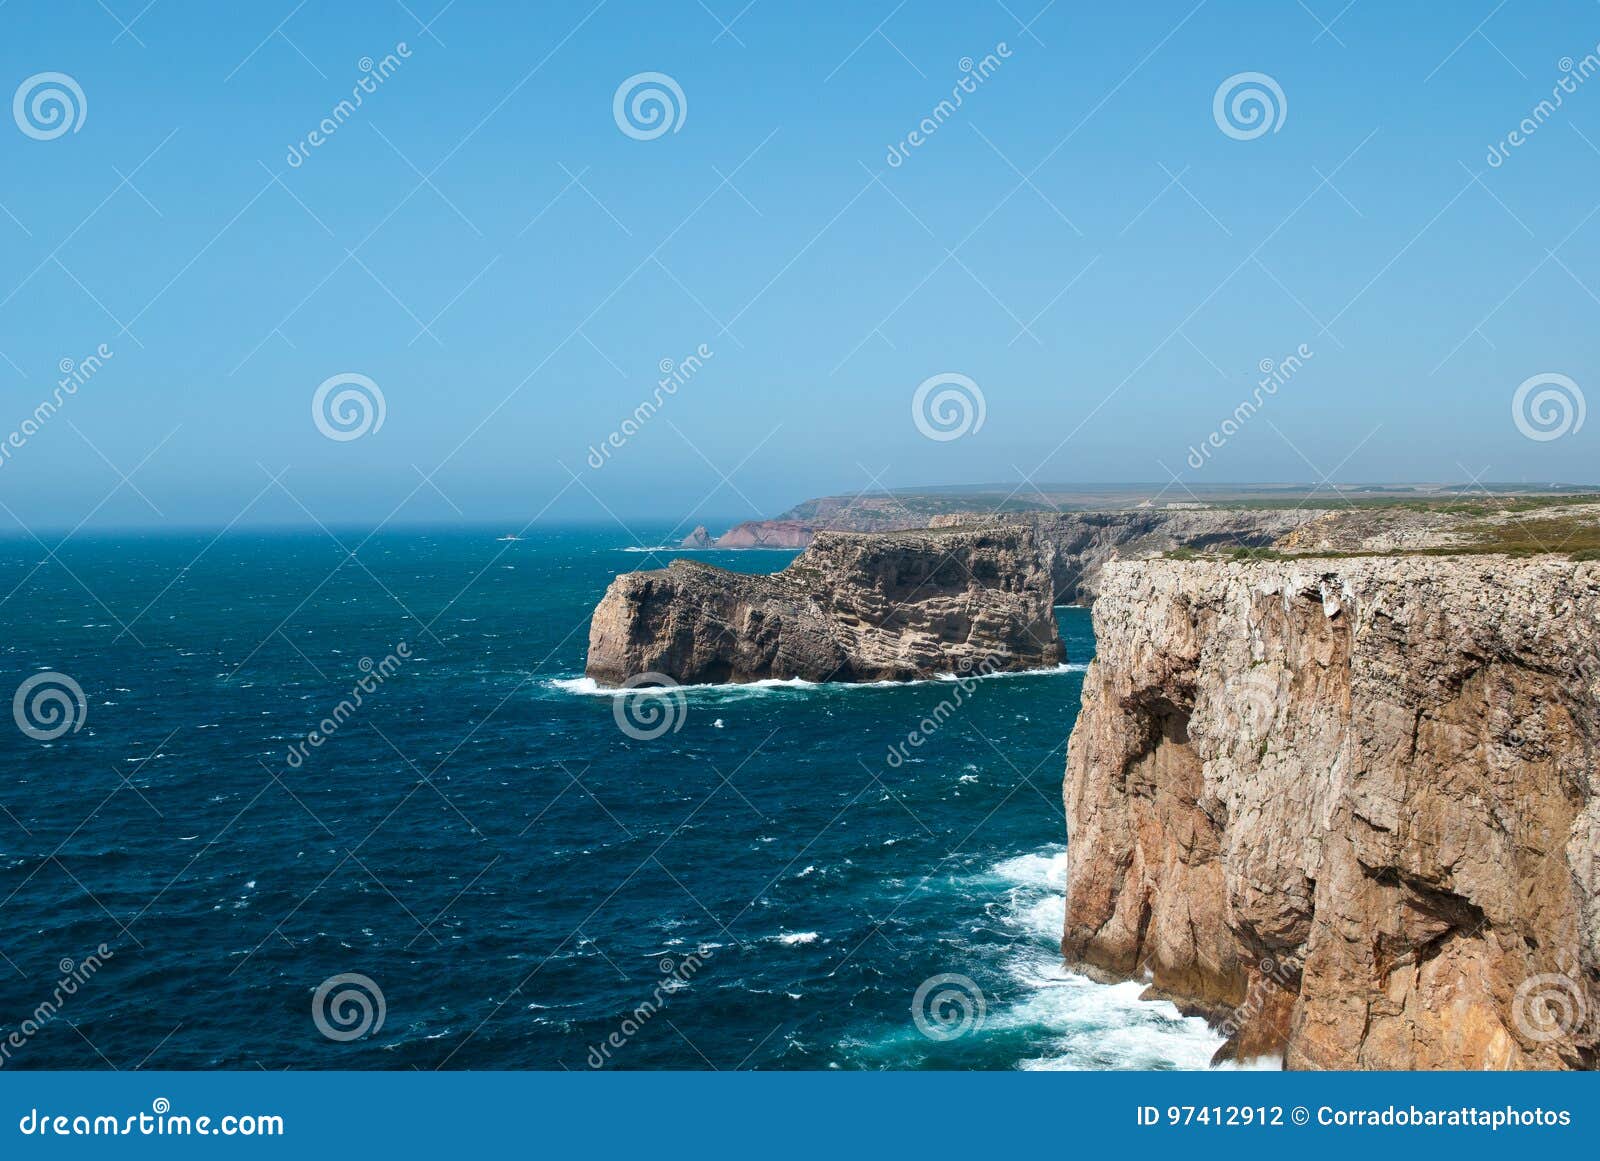 cabo de sao vicente in portugal with a rock that looks just like one to a shoe